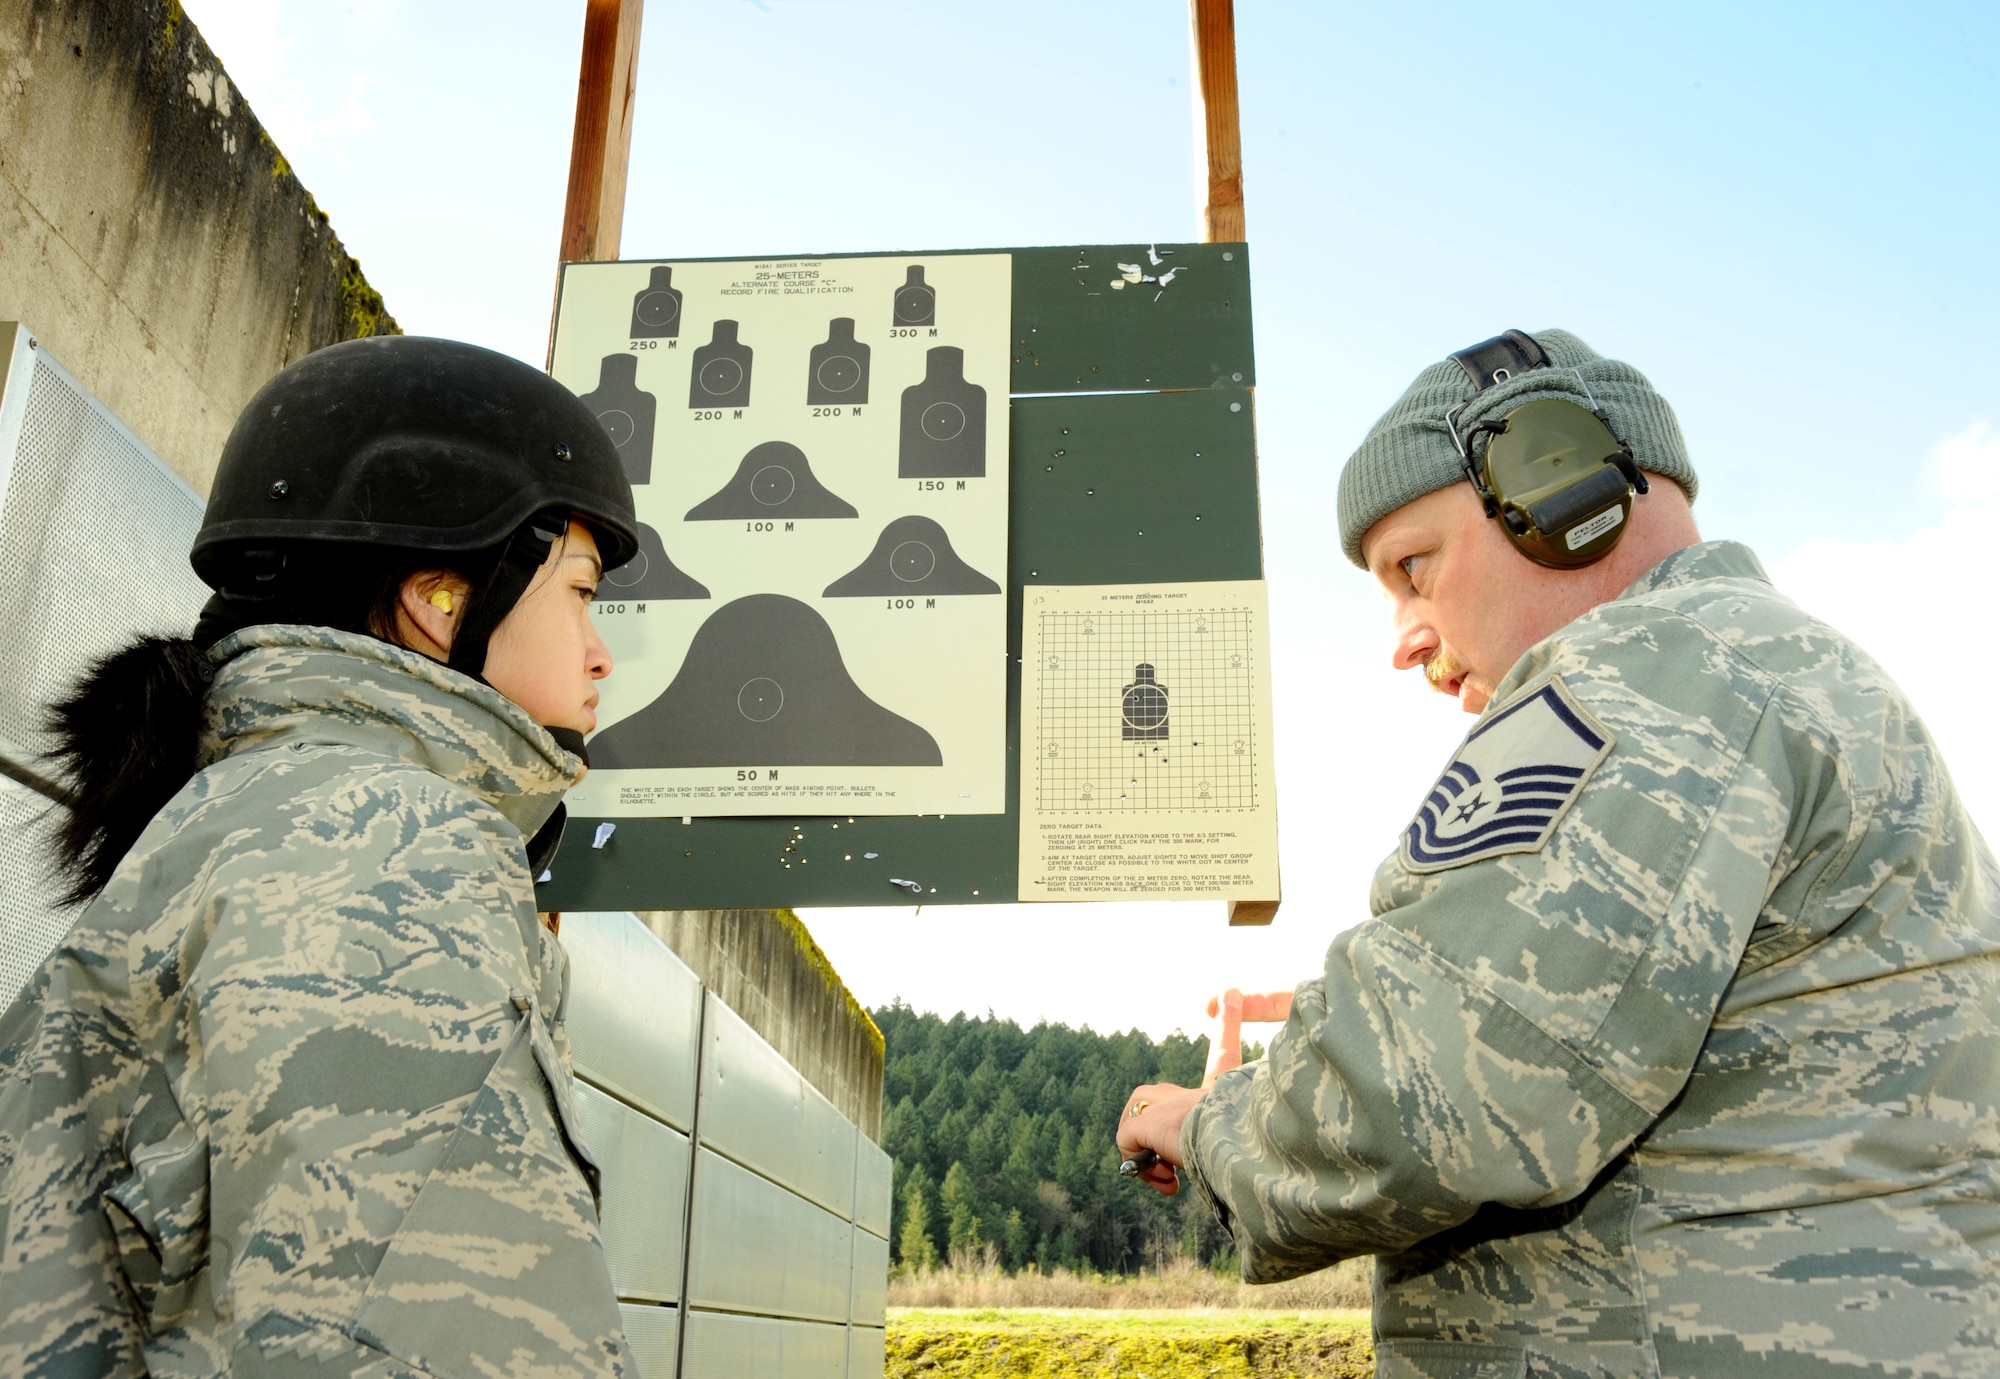 Oregon Air National Guard Senior Airman Linda Le listens to feedback by Master Sgt. Paul Persson as she "zero's" her weapon at Camp Adair, Ore., on February 17, 2011. The two are members of the 116th Air Control Squadron based at Camp Rilea, Ore., and are finishing pre-deployment training on the rifle range as part of the unit's deployment to the Middle East in March of 2011. (U.S. Air Force photograph by Tech. Sgt. John Hughel, 142nd Fighter Wing Public Affairs) 